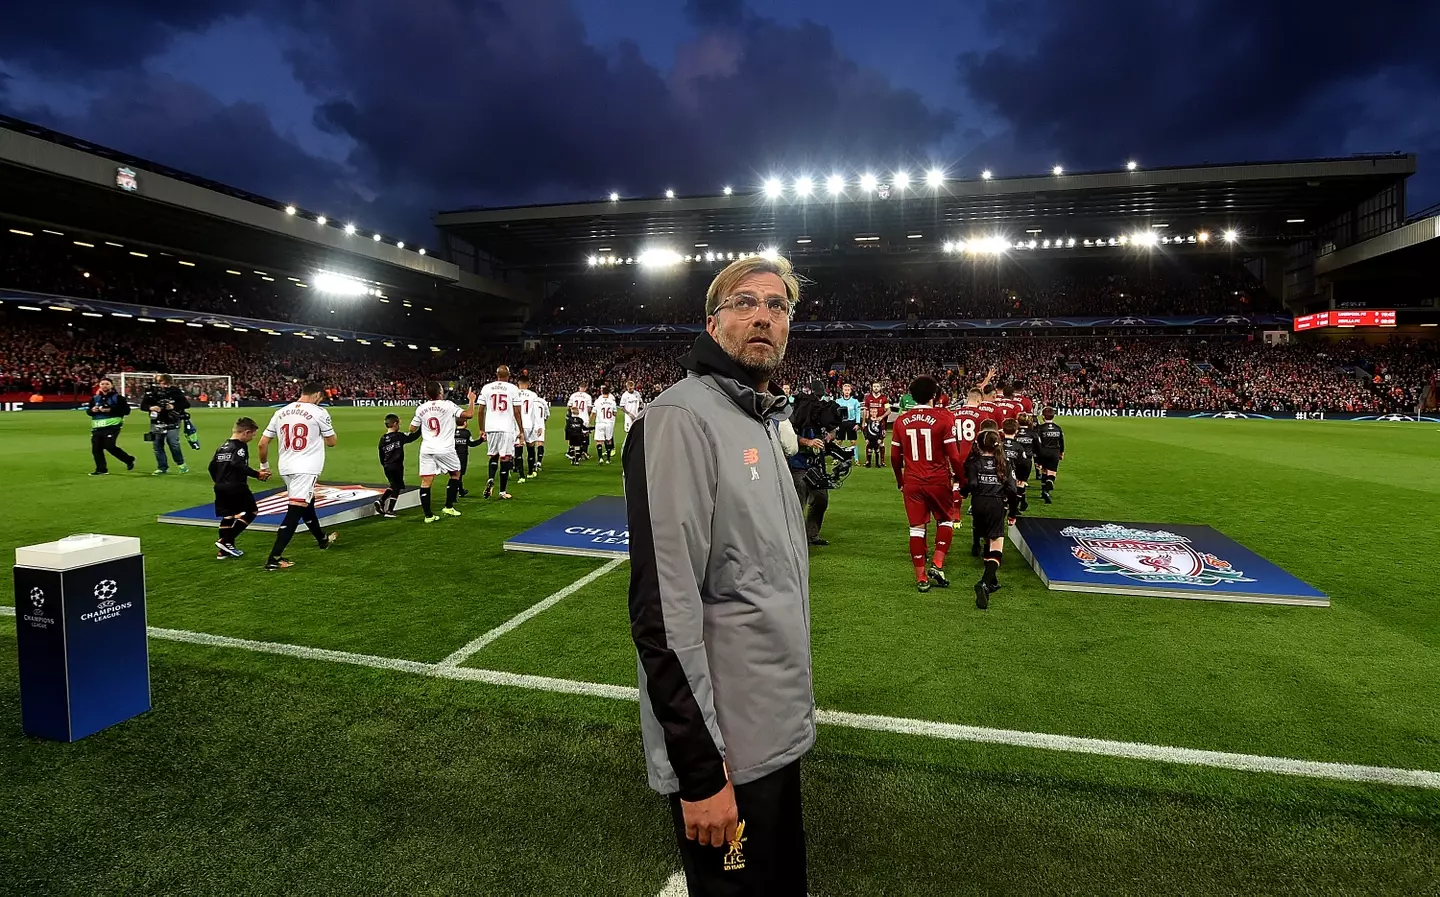 Klopp during Liverpool's 2-2 draw with Sevilla. (Image